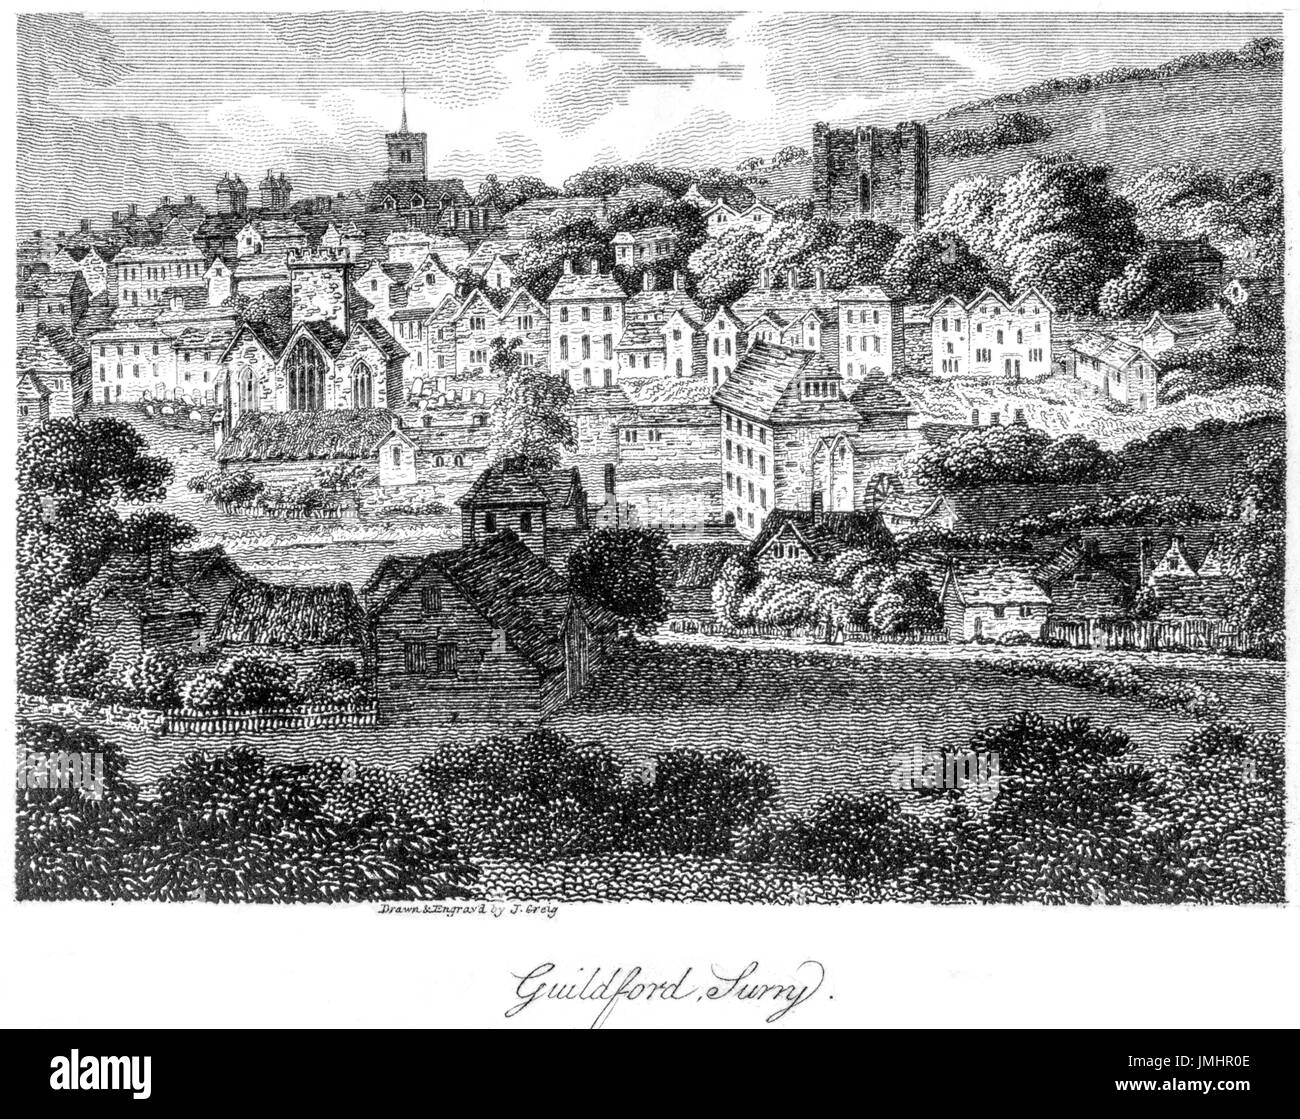 An engraving of Guildford, Surrey scanned at high resolution from a book printed in 1808.  Believed copyright free. Stock Photo